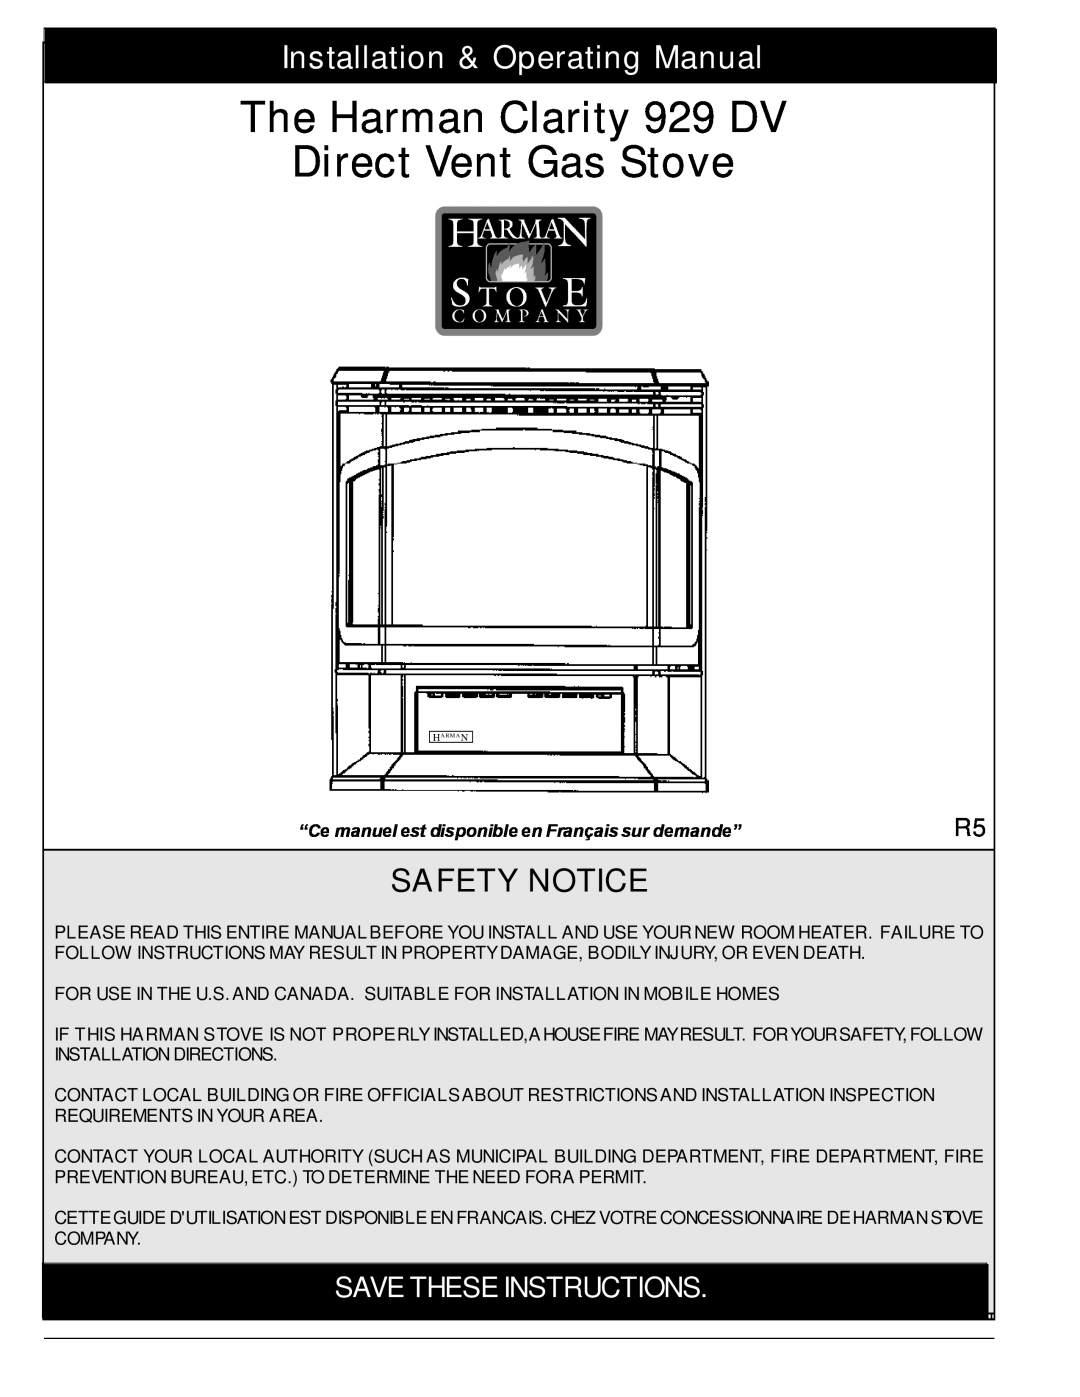 Harman Stove Company 929 DV manual Installation & Operating Manual, Safety Notice, Save These Instructions 